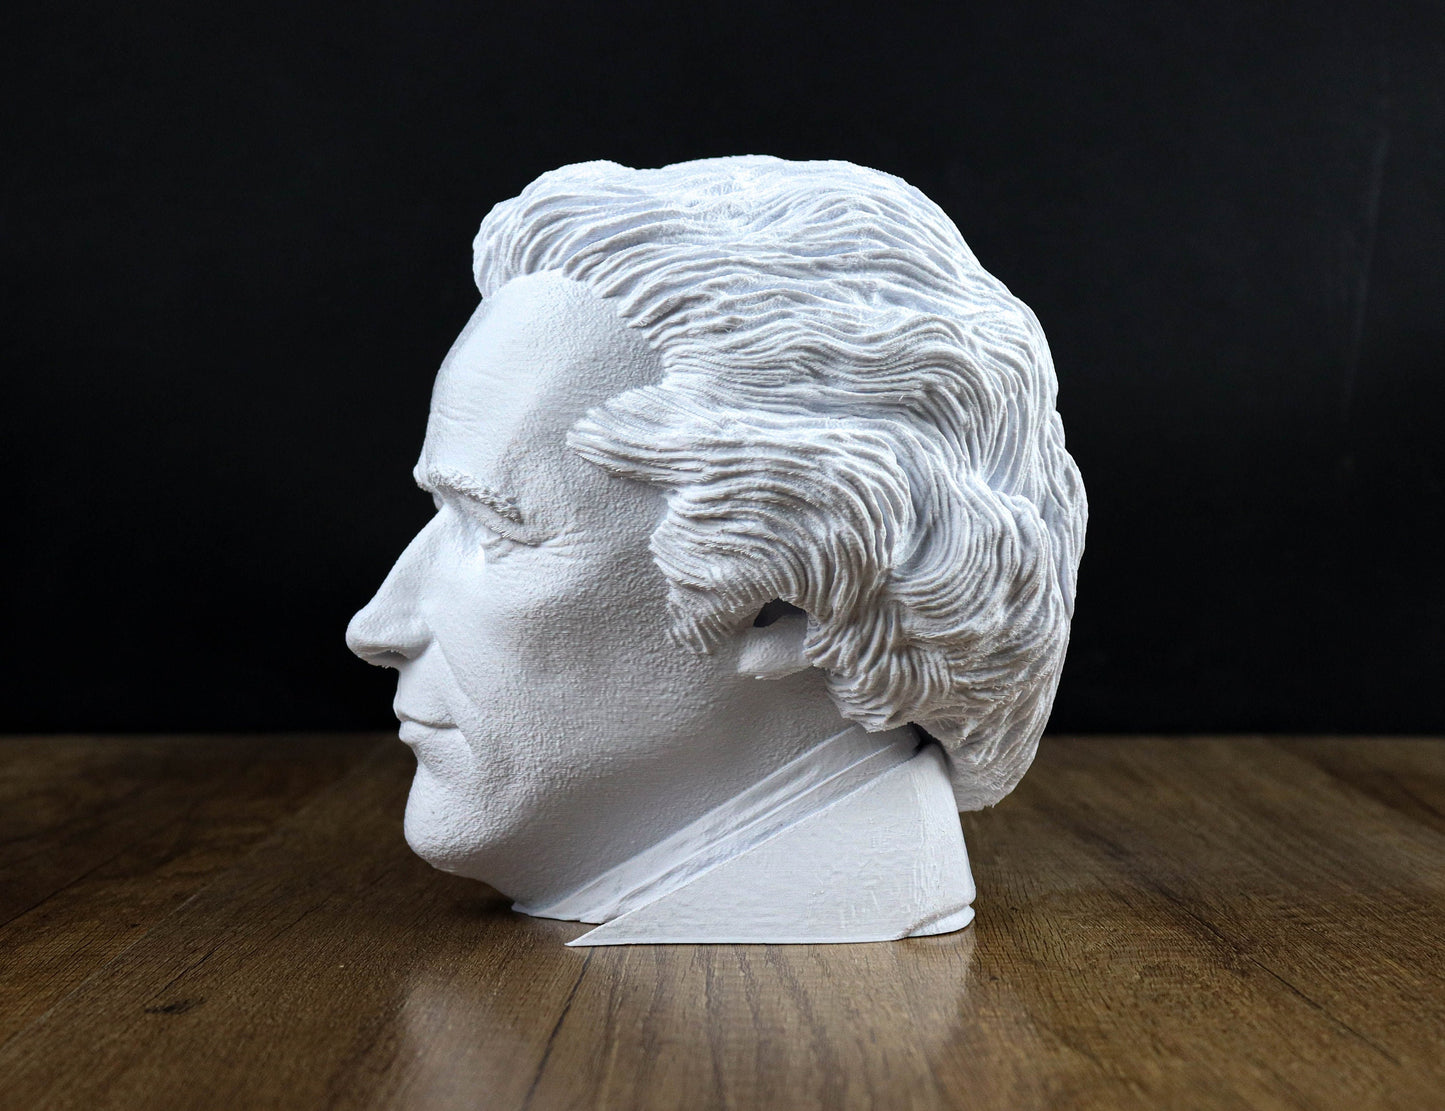 Alexander Hamilton Bust, Founding Father of the United States Sculpture, Headphone Holder Decoration